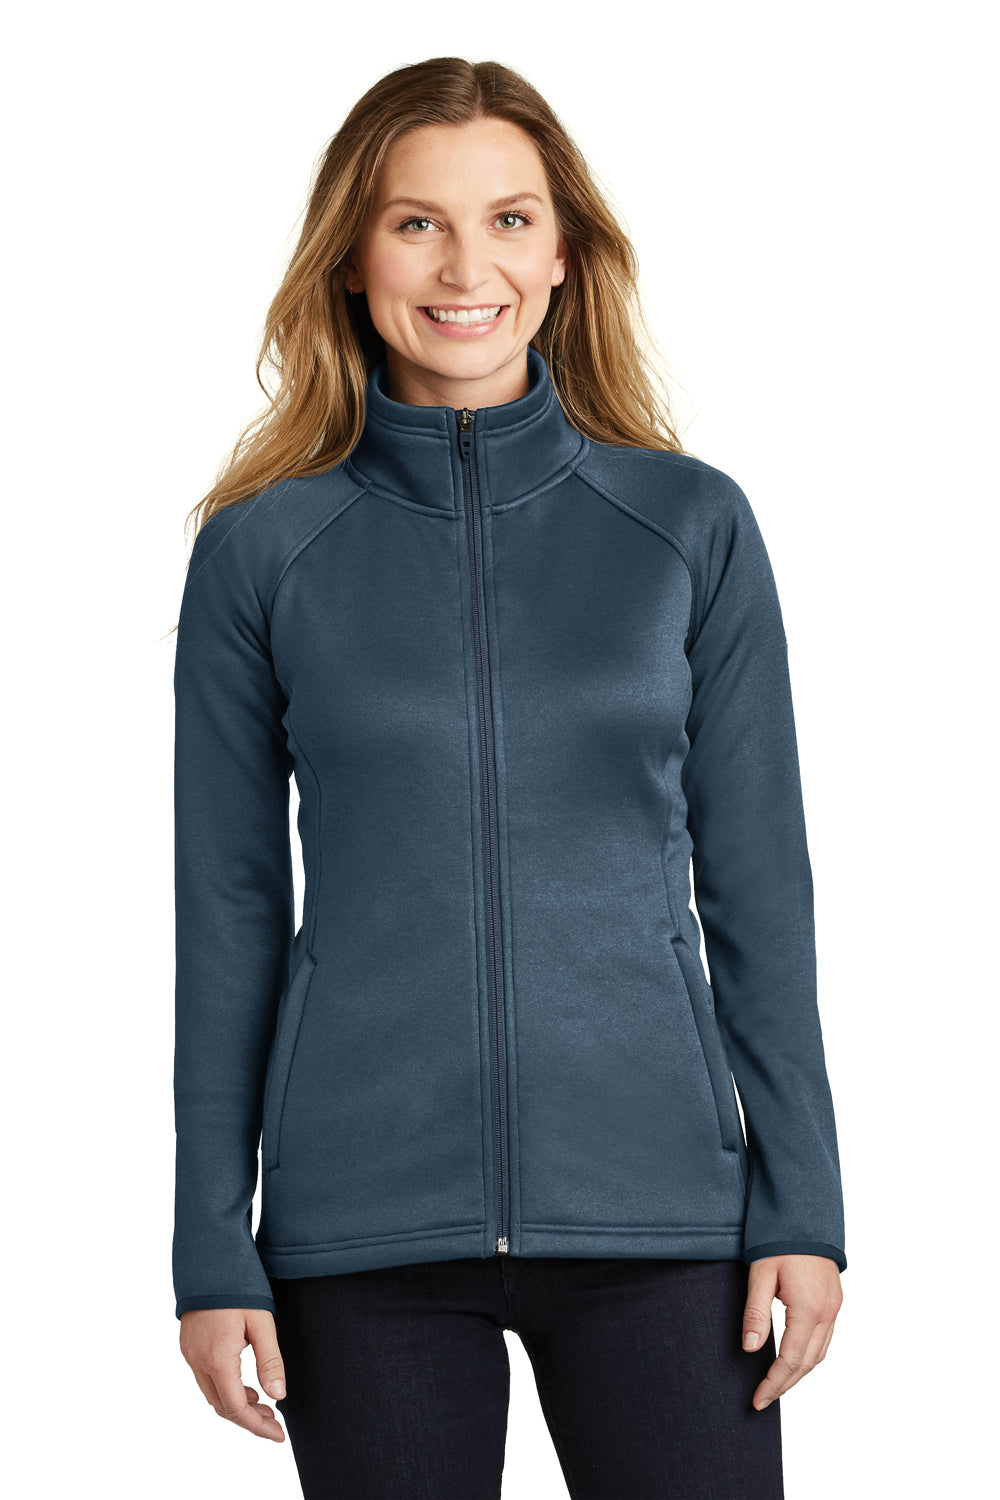 The North Face NF0A3LHA Womens Canyon Flats Full Zip Fleece Jacket Heather Navy Blue Front